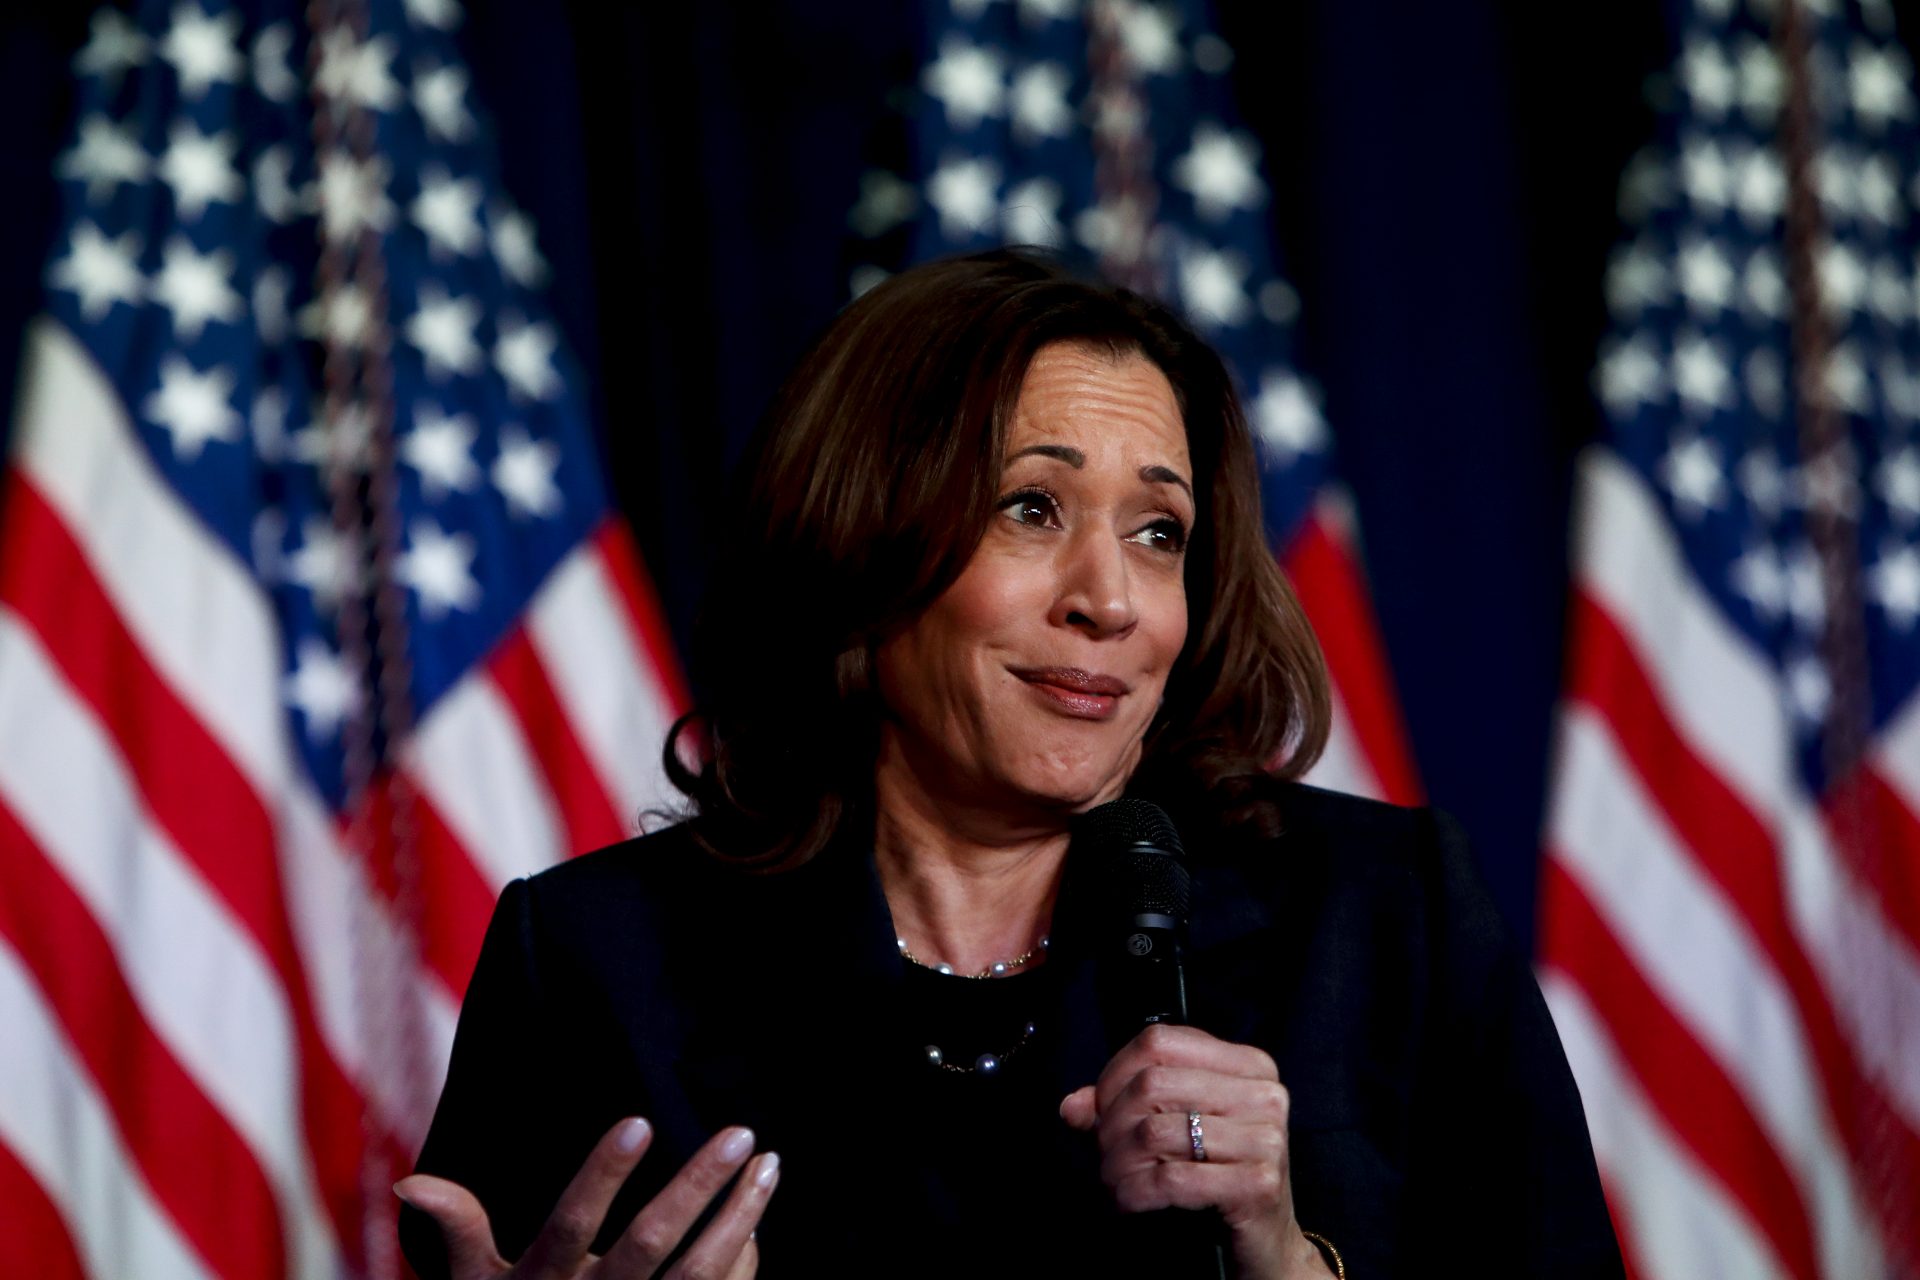 Kamala Harris is bringing in huge donations for herself and the Democratic Party